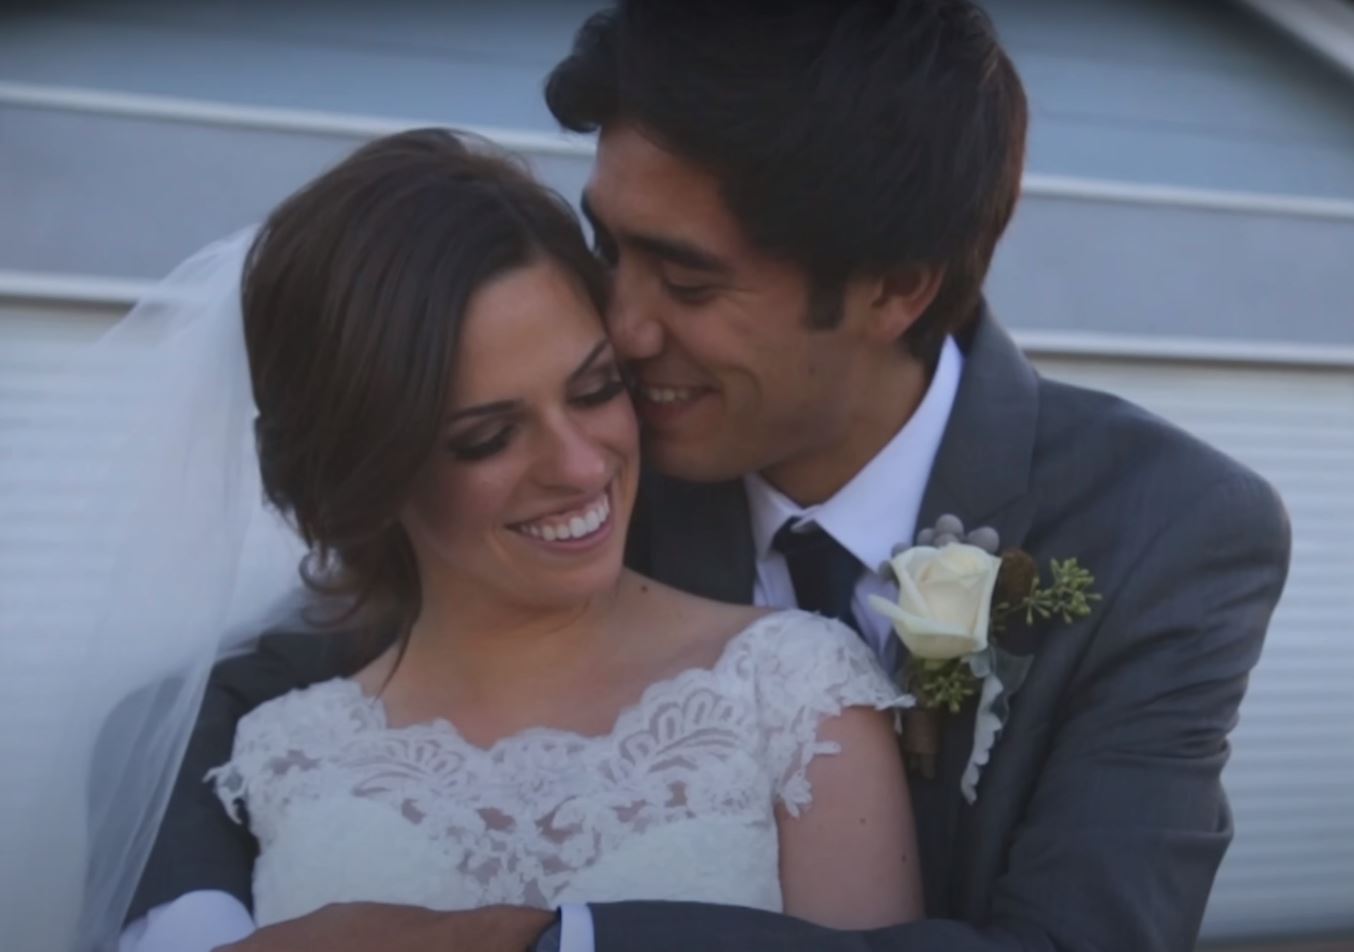 Zach King and Rachel Holm at their wedding